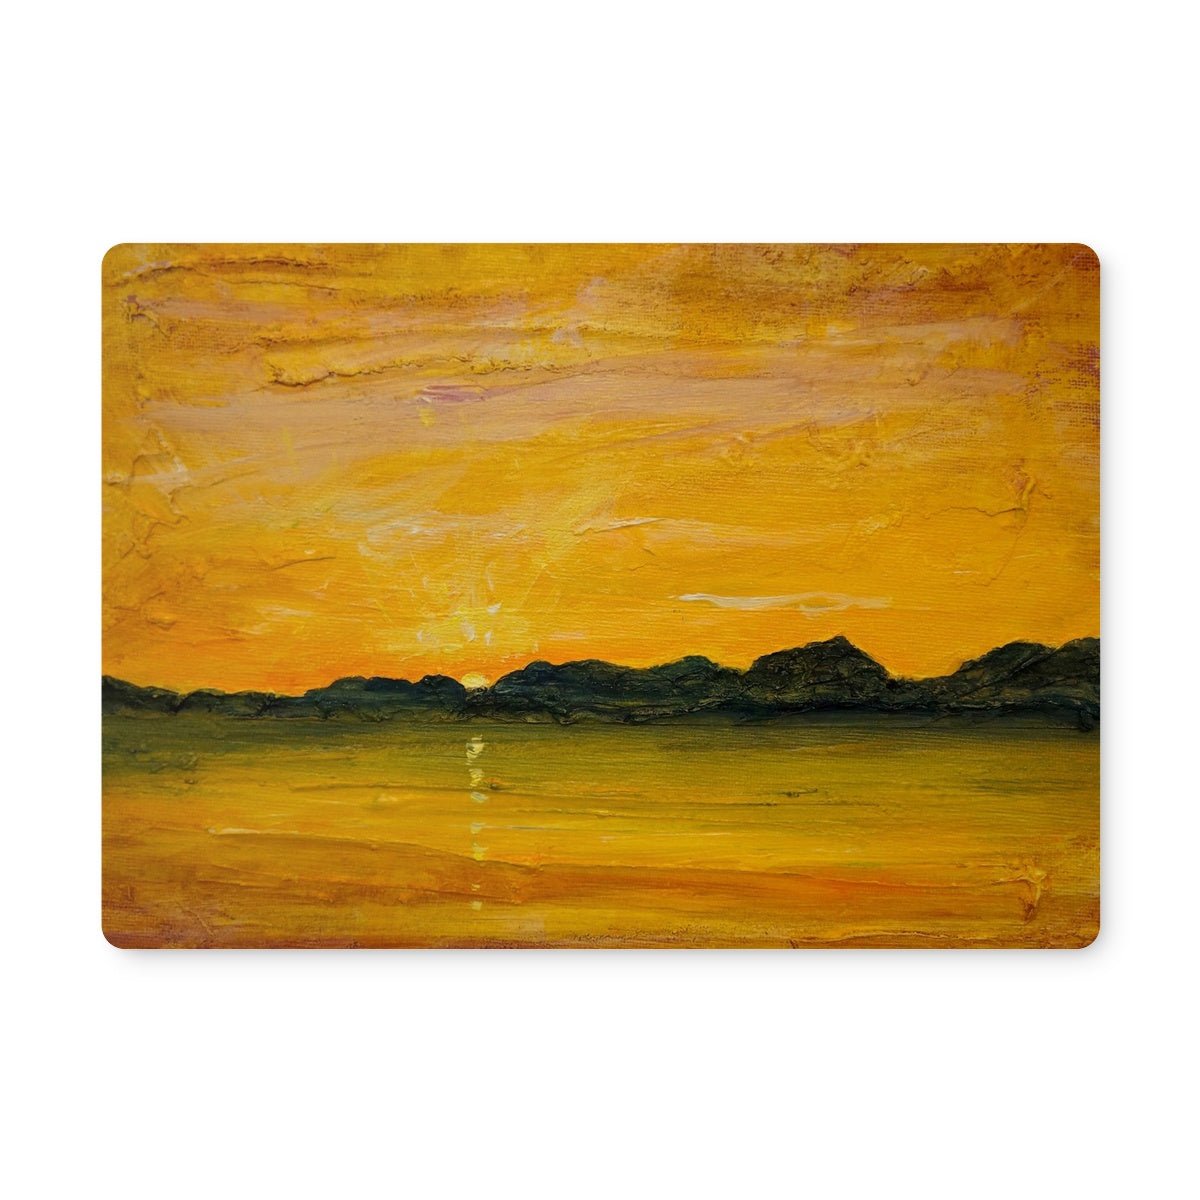 Jura Sunset Art Gifts Placemat-Placemats-Hebridean Islands Art Gallery-6 Placemats-Paintings, Prints, Homeware, Art Gifts From Scotland By Scottish Artist Kevin Hunter